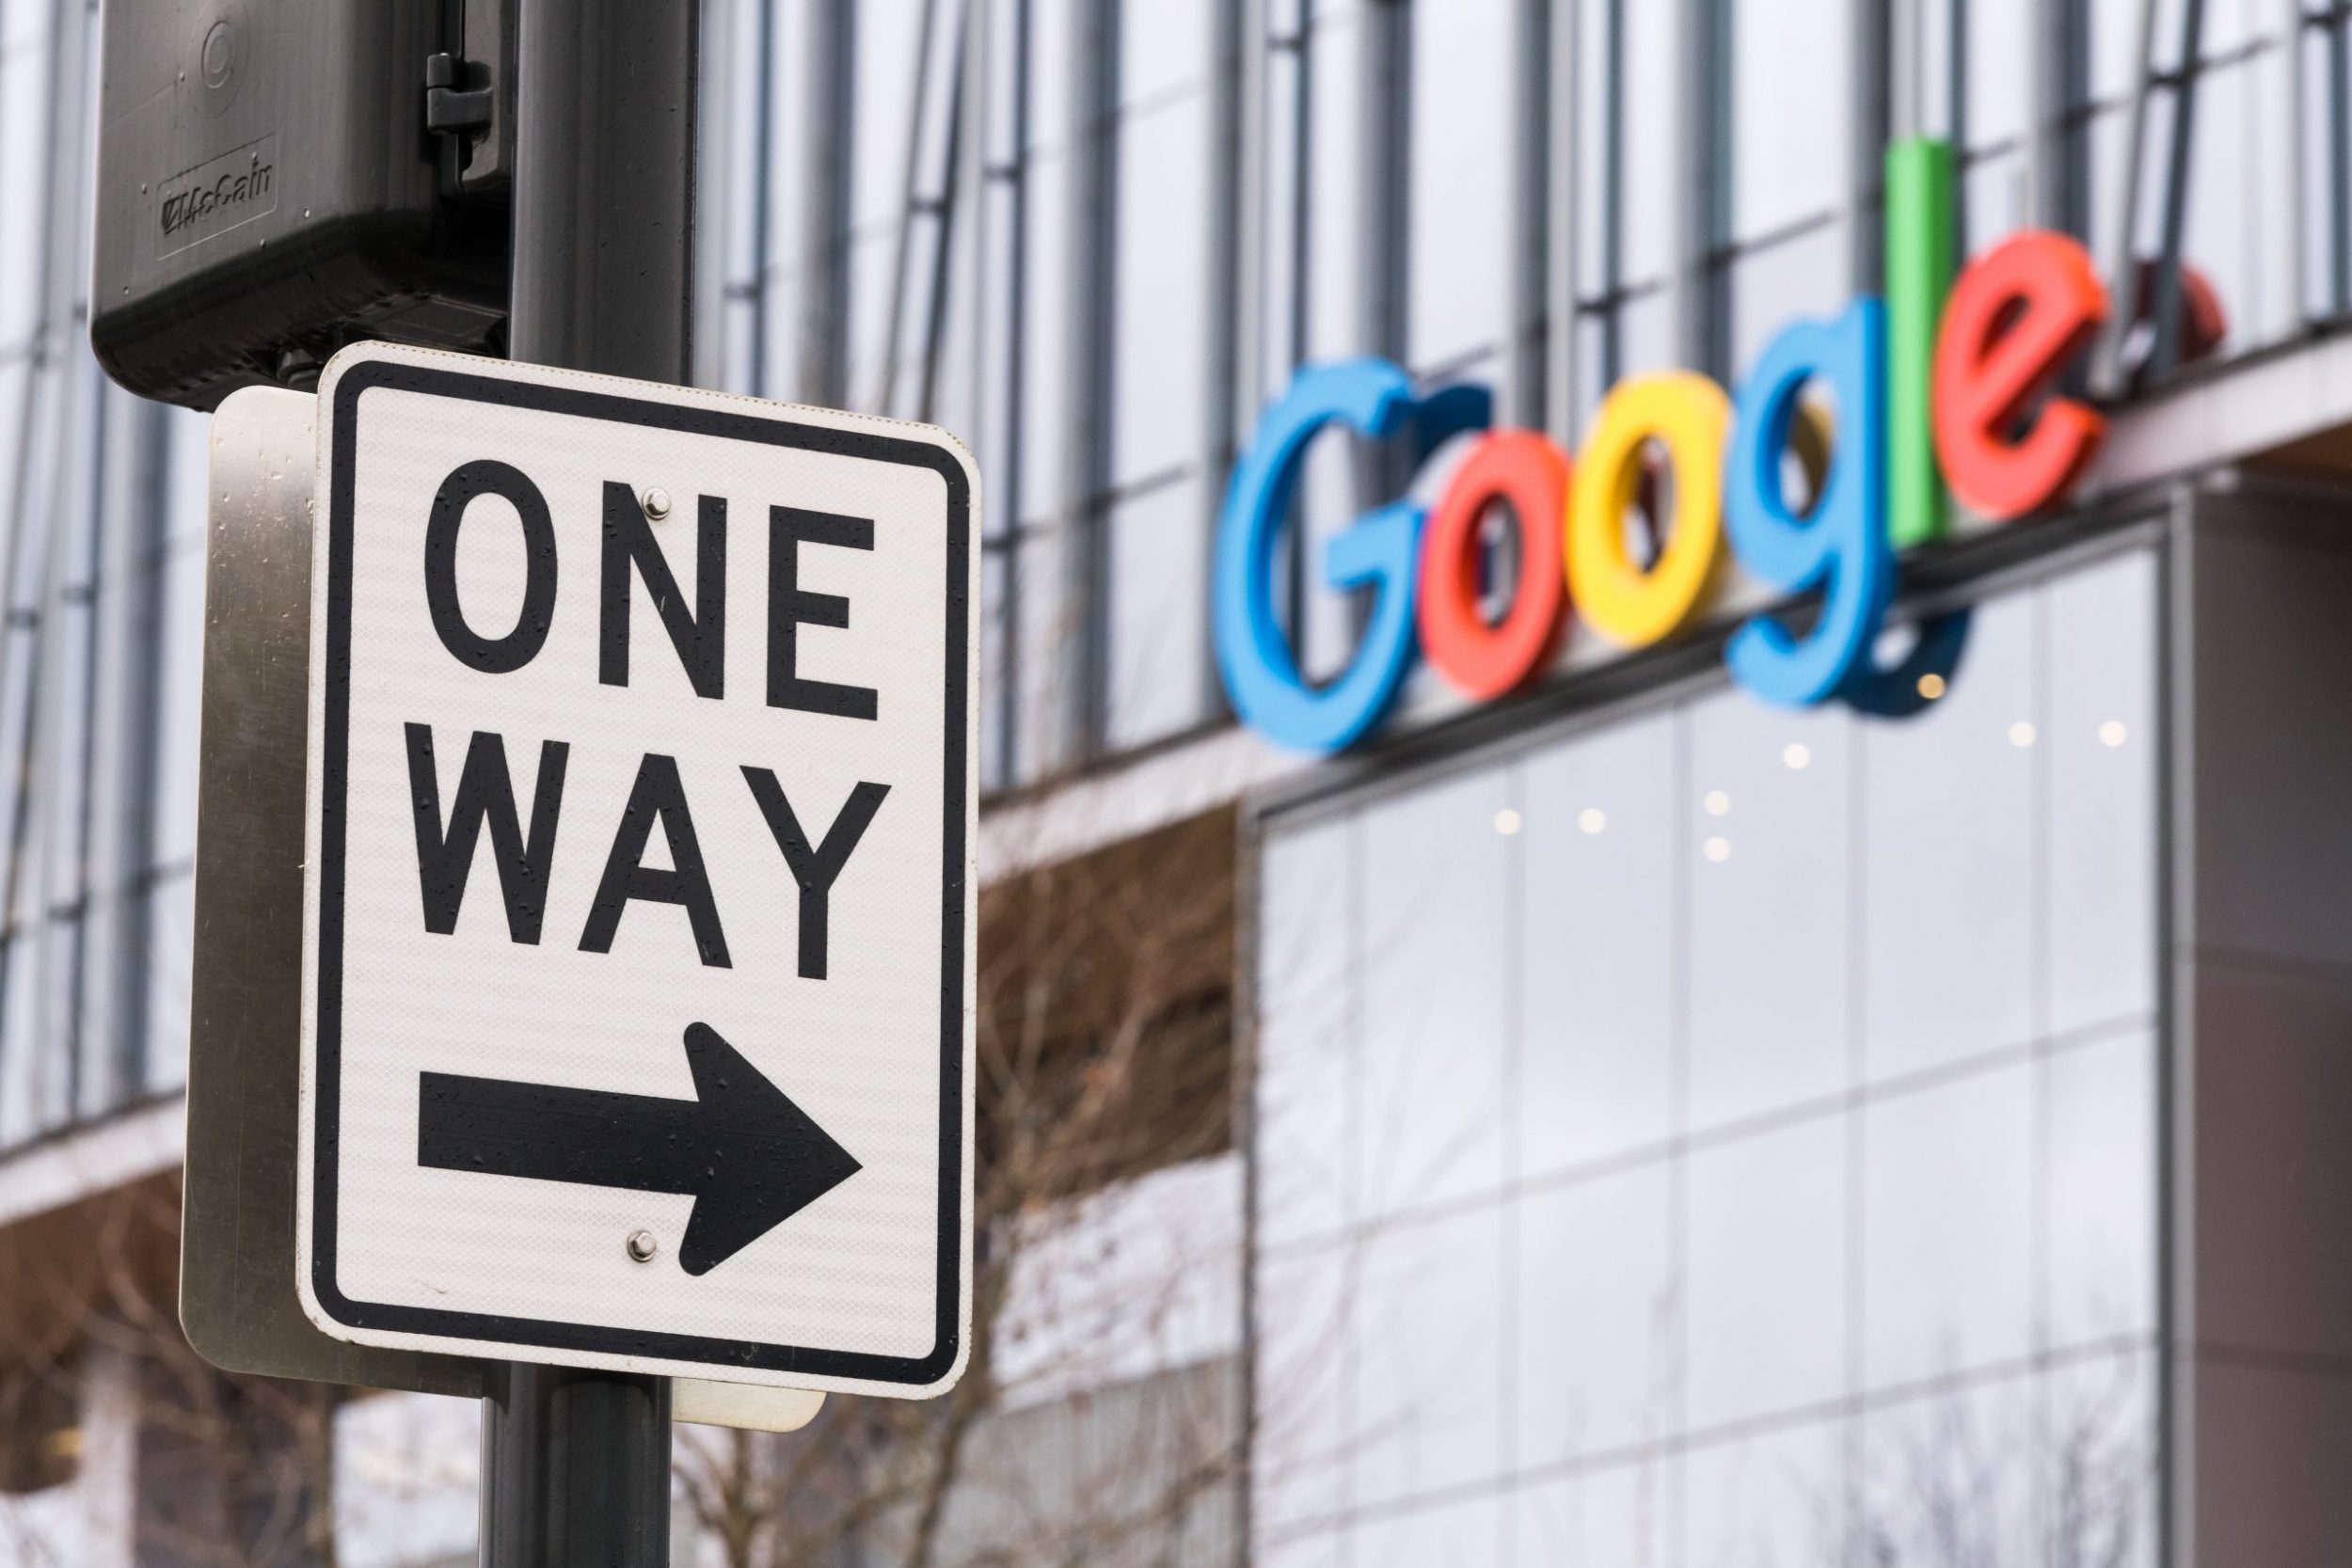 One way sign in front of Google building